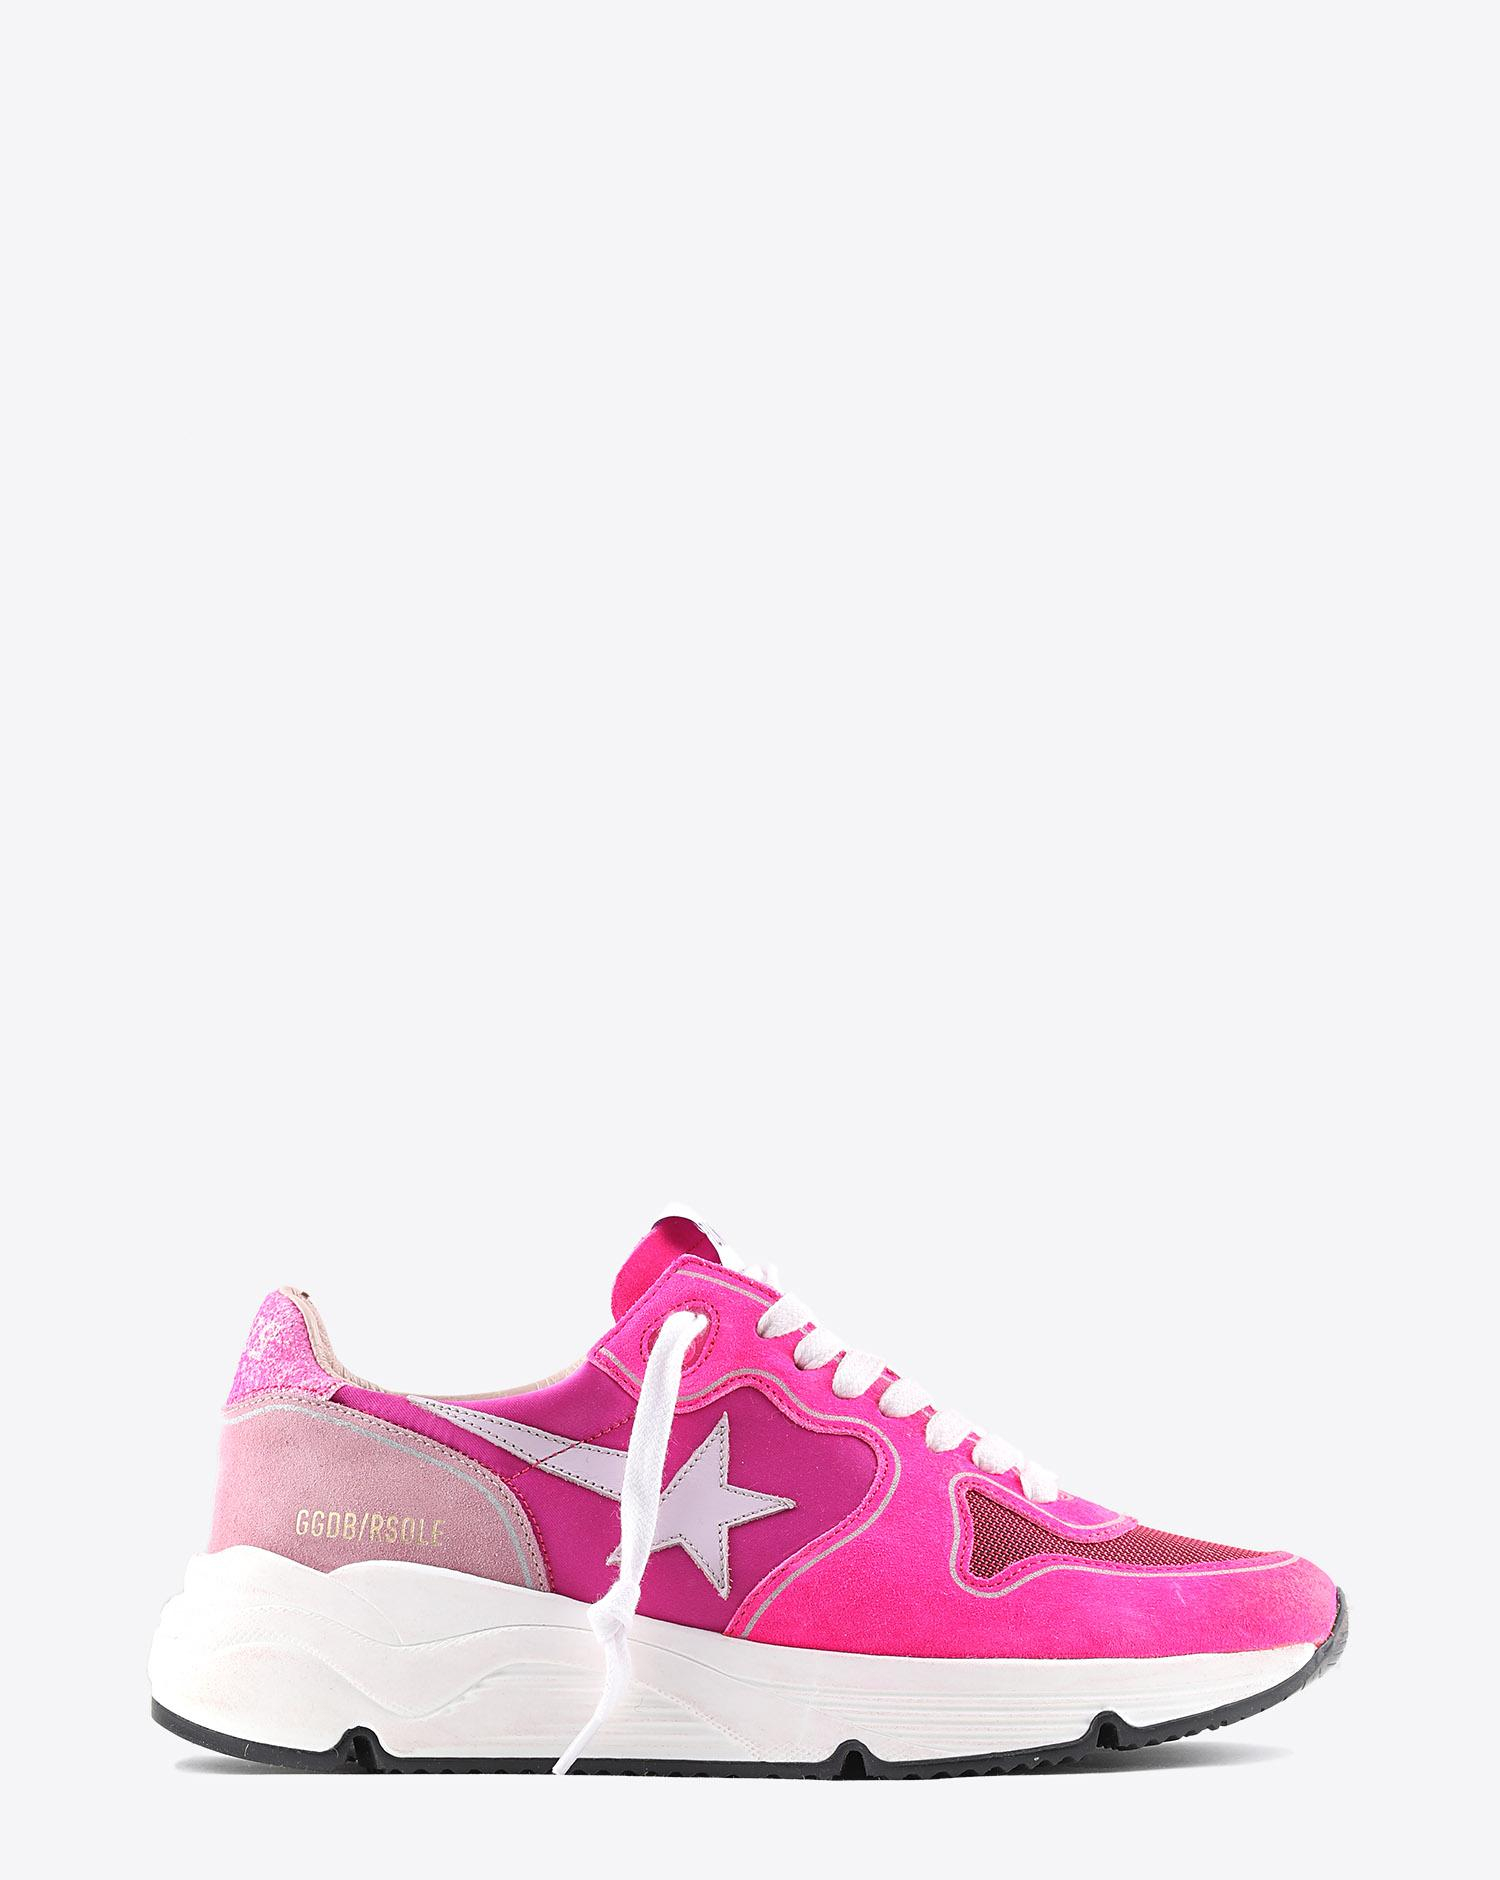 Golden Goose Woman Pré-Collection Sneakers Running Sole - Fuxia Suede - Pink Star - Glitter  